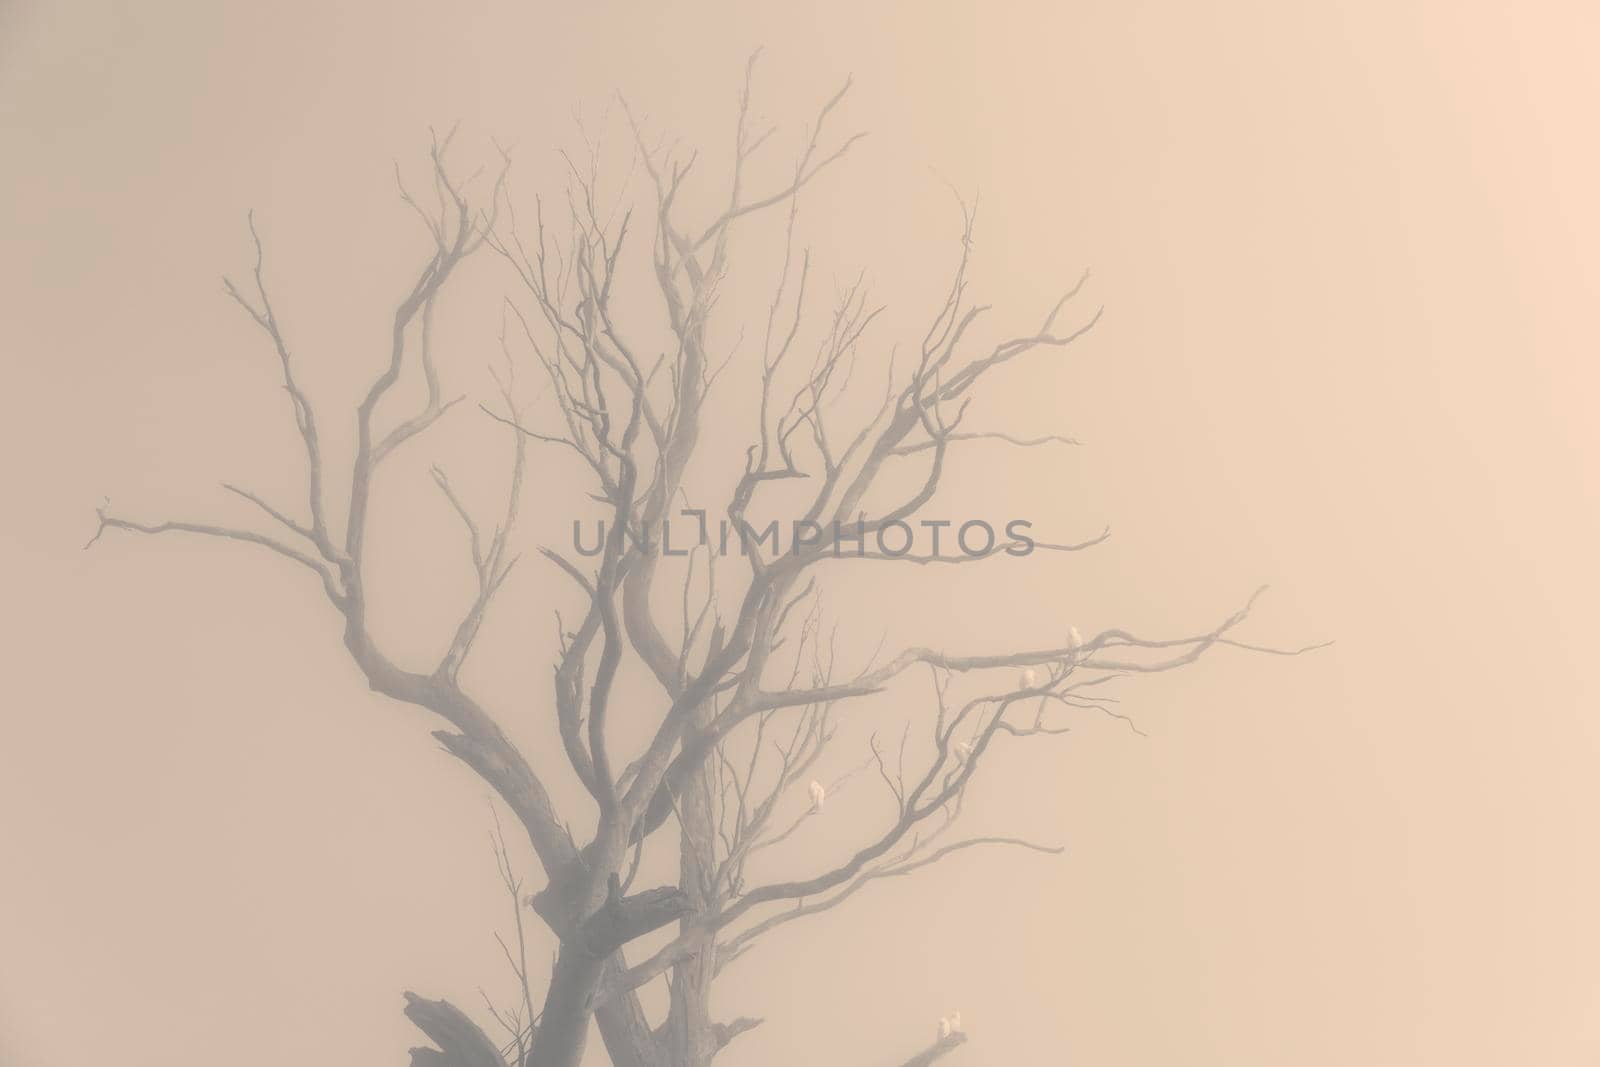 Sulphur Crest Cockatoos in a tree in the fog in Australia by WittkePhotos